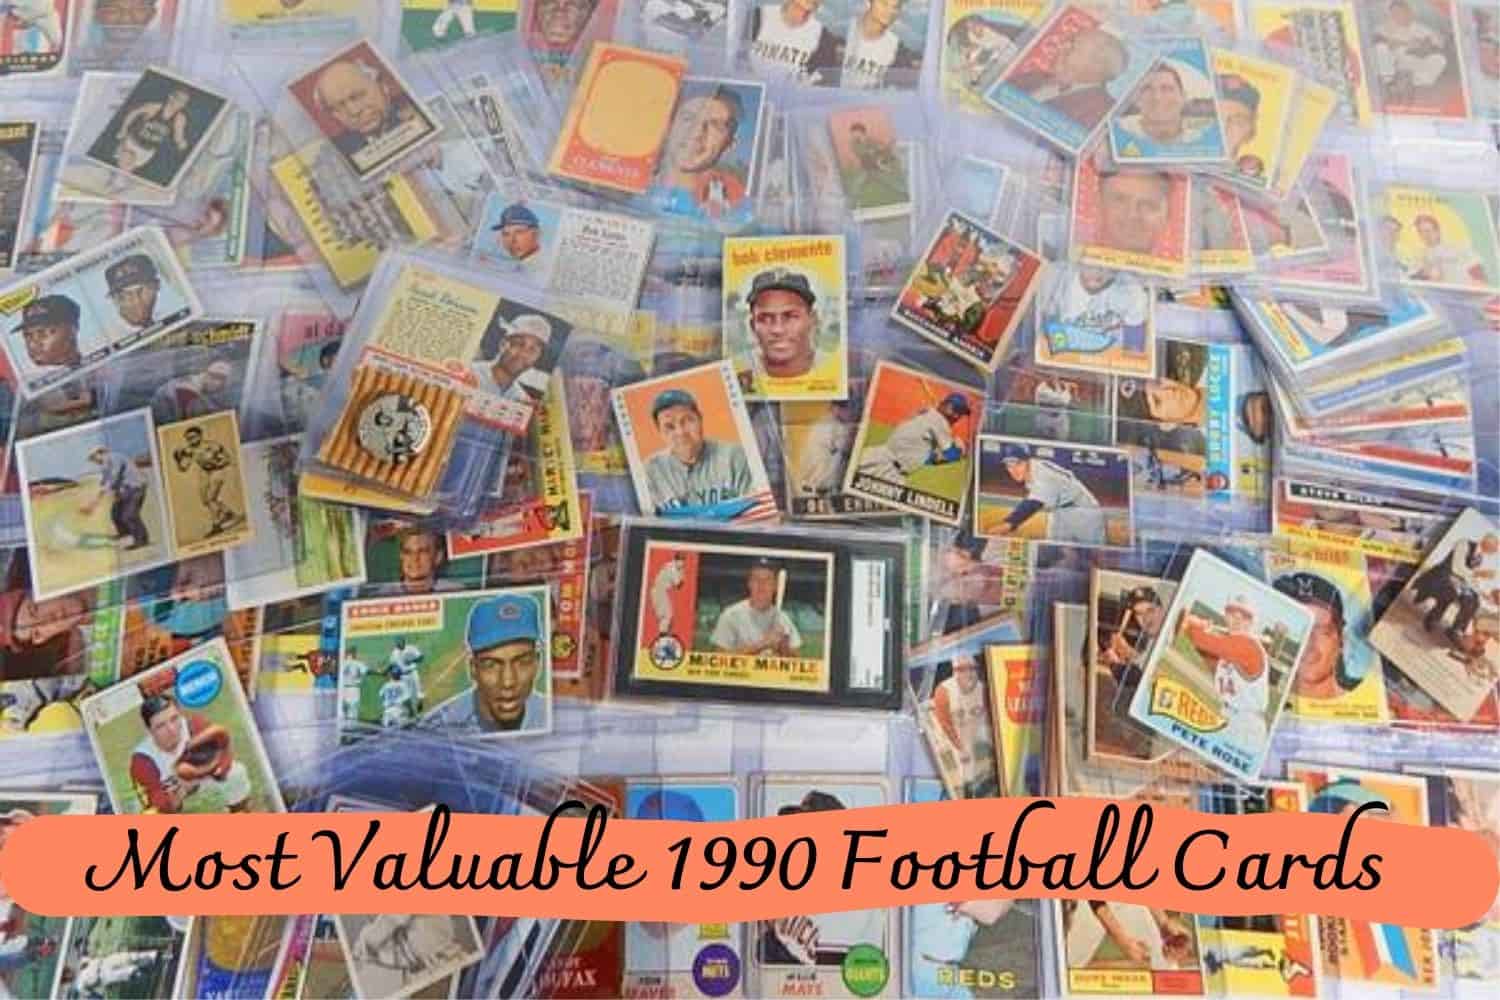 Most Valuable 1990 Football Cards